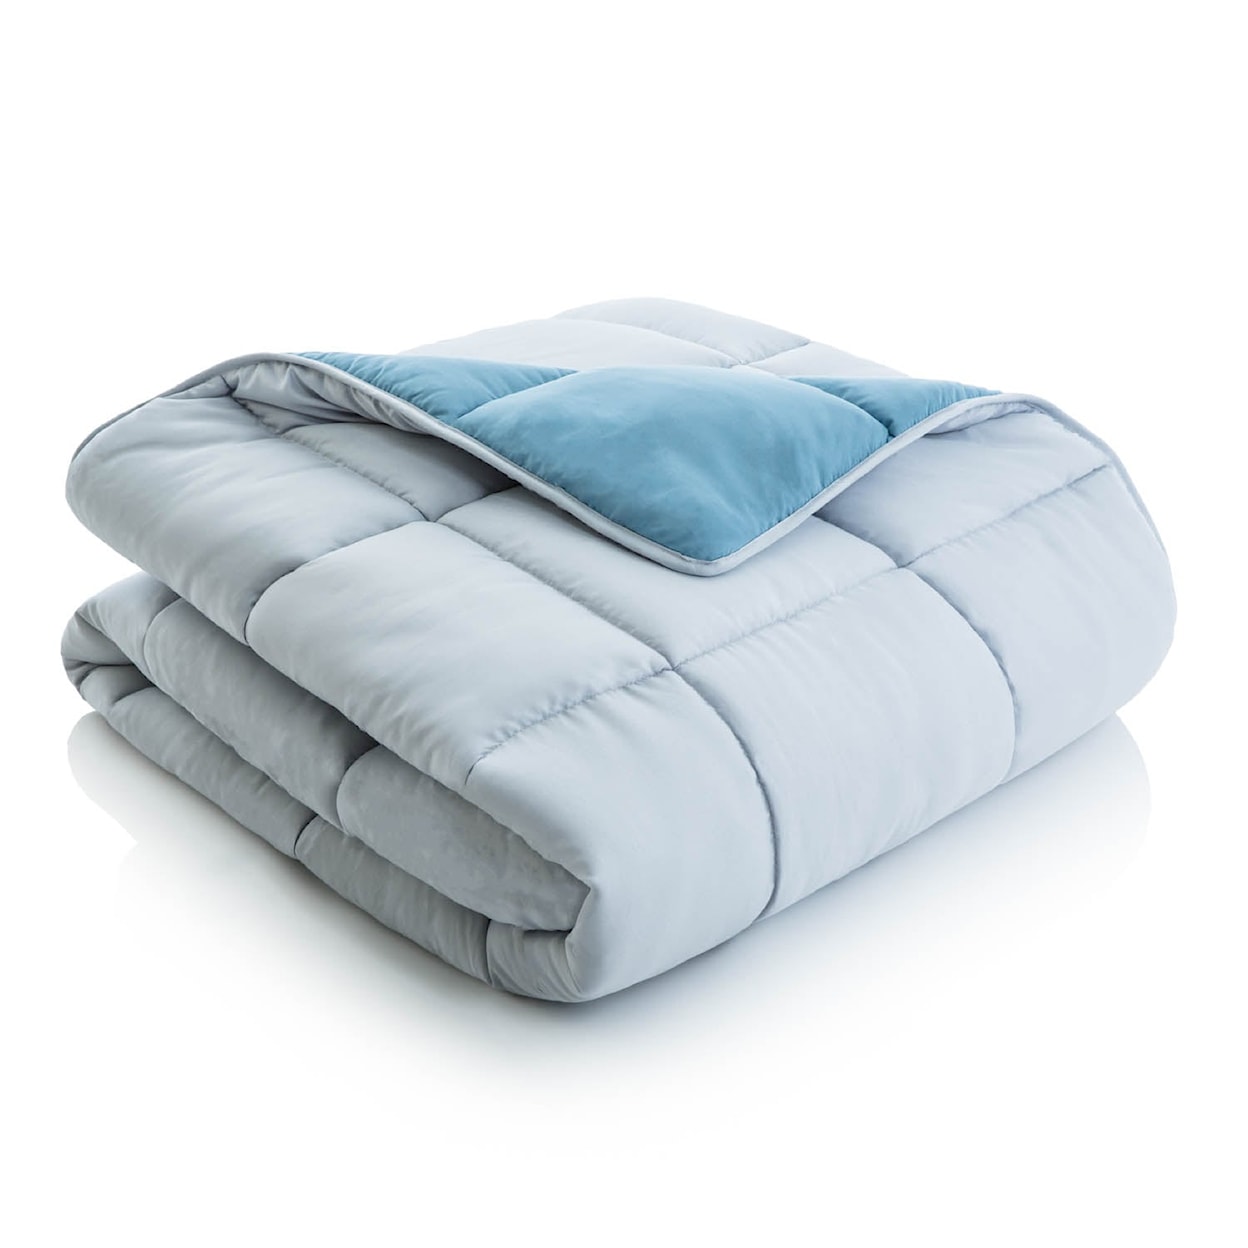 Malouf Reversible Bed in a Bag Full White Reversible Bed in a Bag